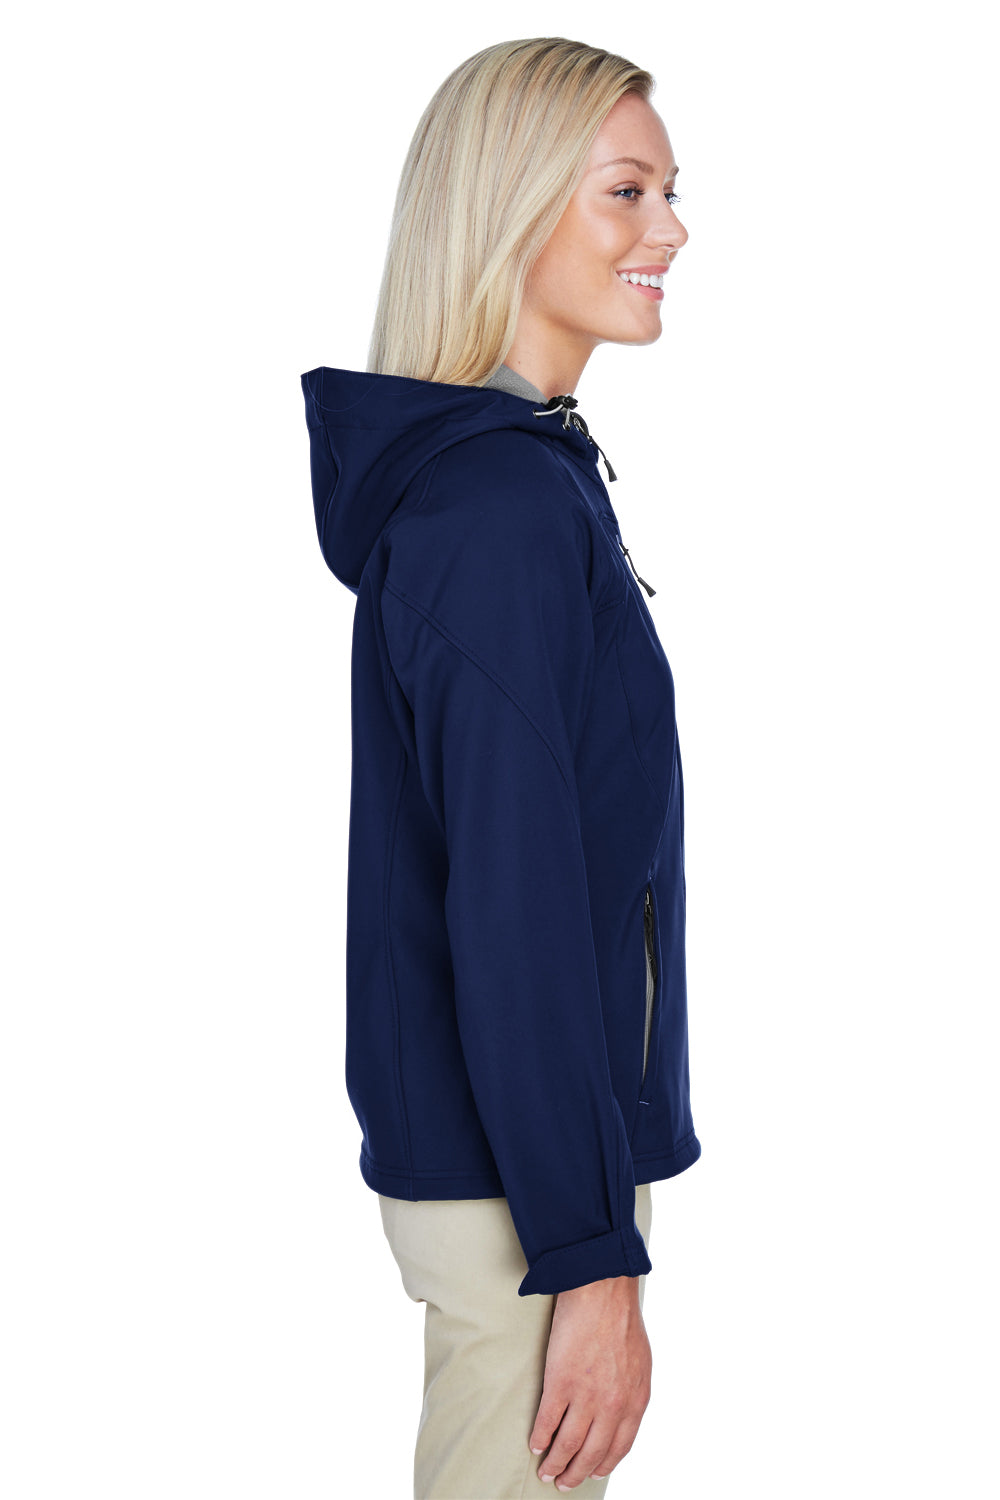 North End 78166 Womens Prospect Water Resistant Full Zip Hooded Jacket Navy Blue Side